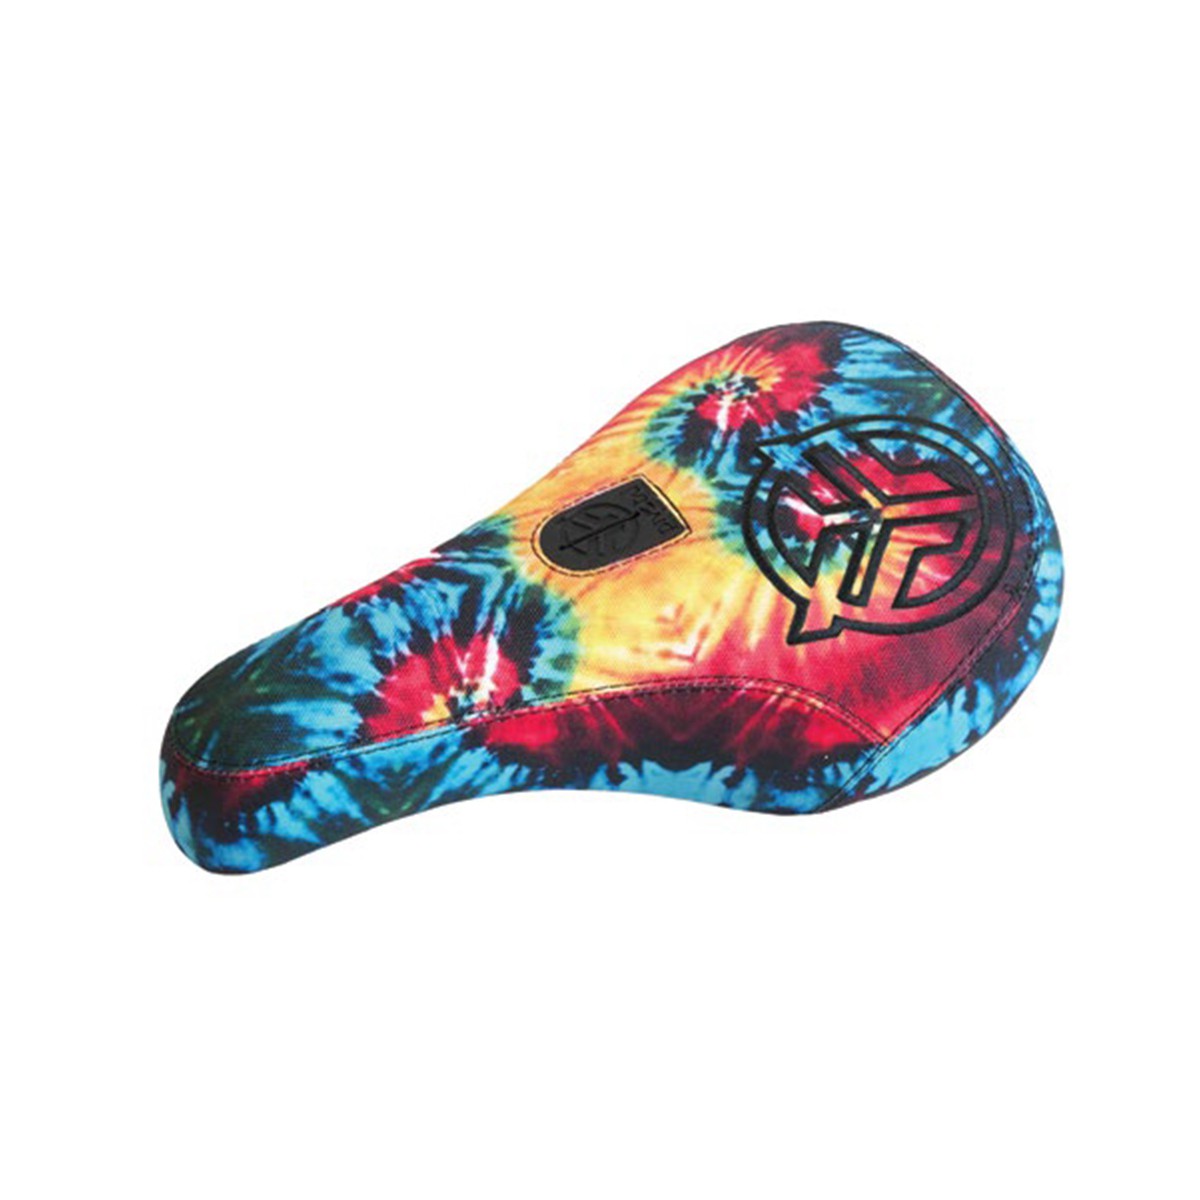 Federal bikes SELLE FEDERAL MID PIVOTAL RAISED STITCHING TIE DYE